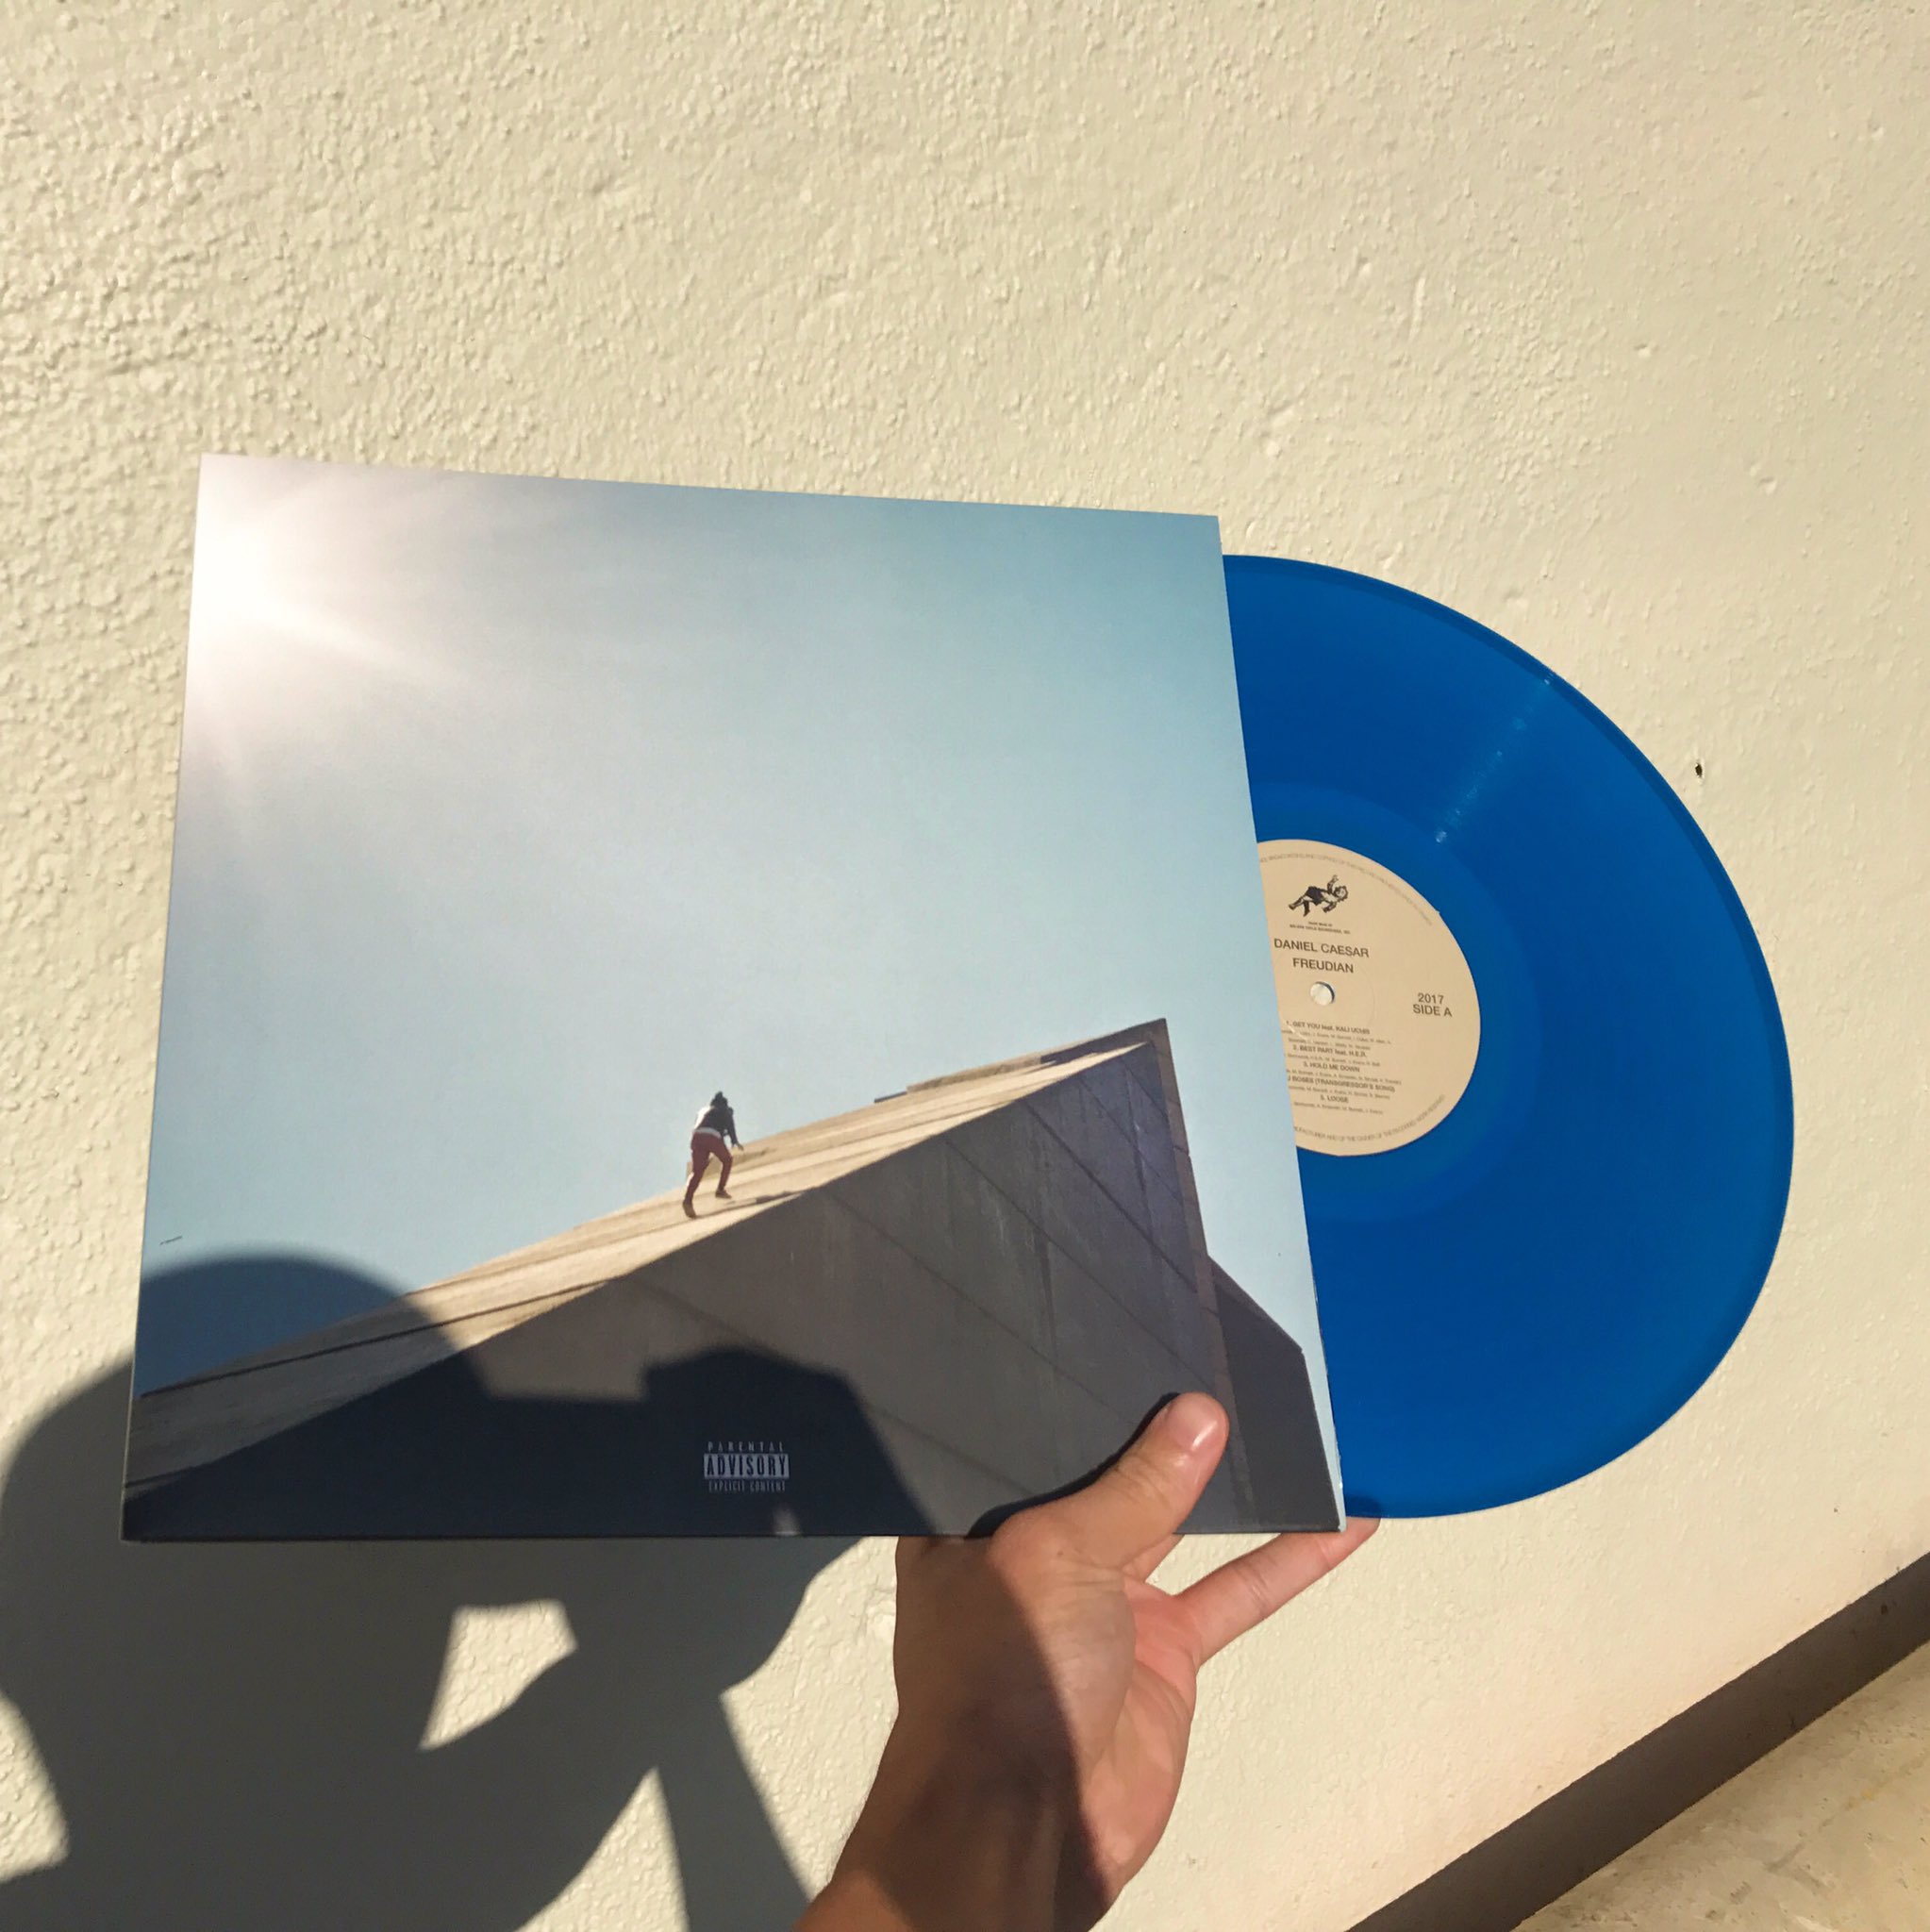 Sean Brown on "Literally and figuratively this record has no skips. @danielcaesar's "Freudian" vinyl designed by me and @keavanx. https://t.co/umSVesPjEG" / Twitter